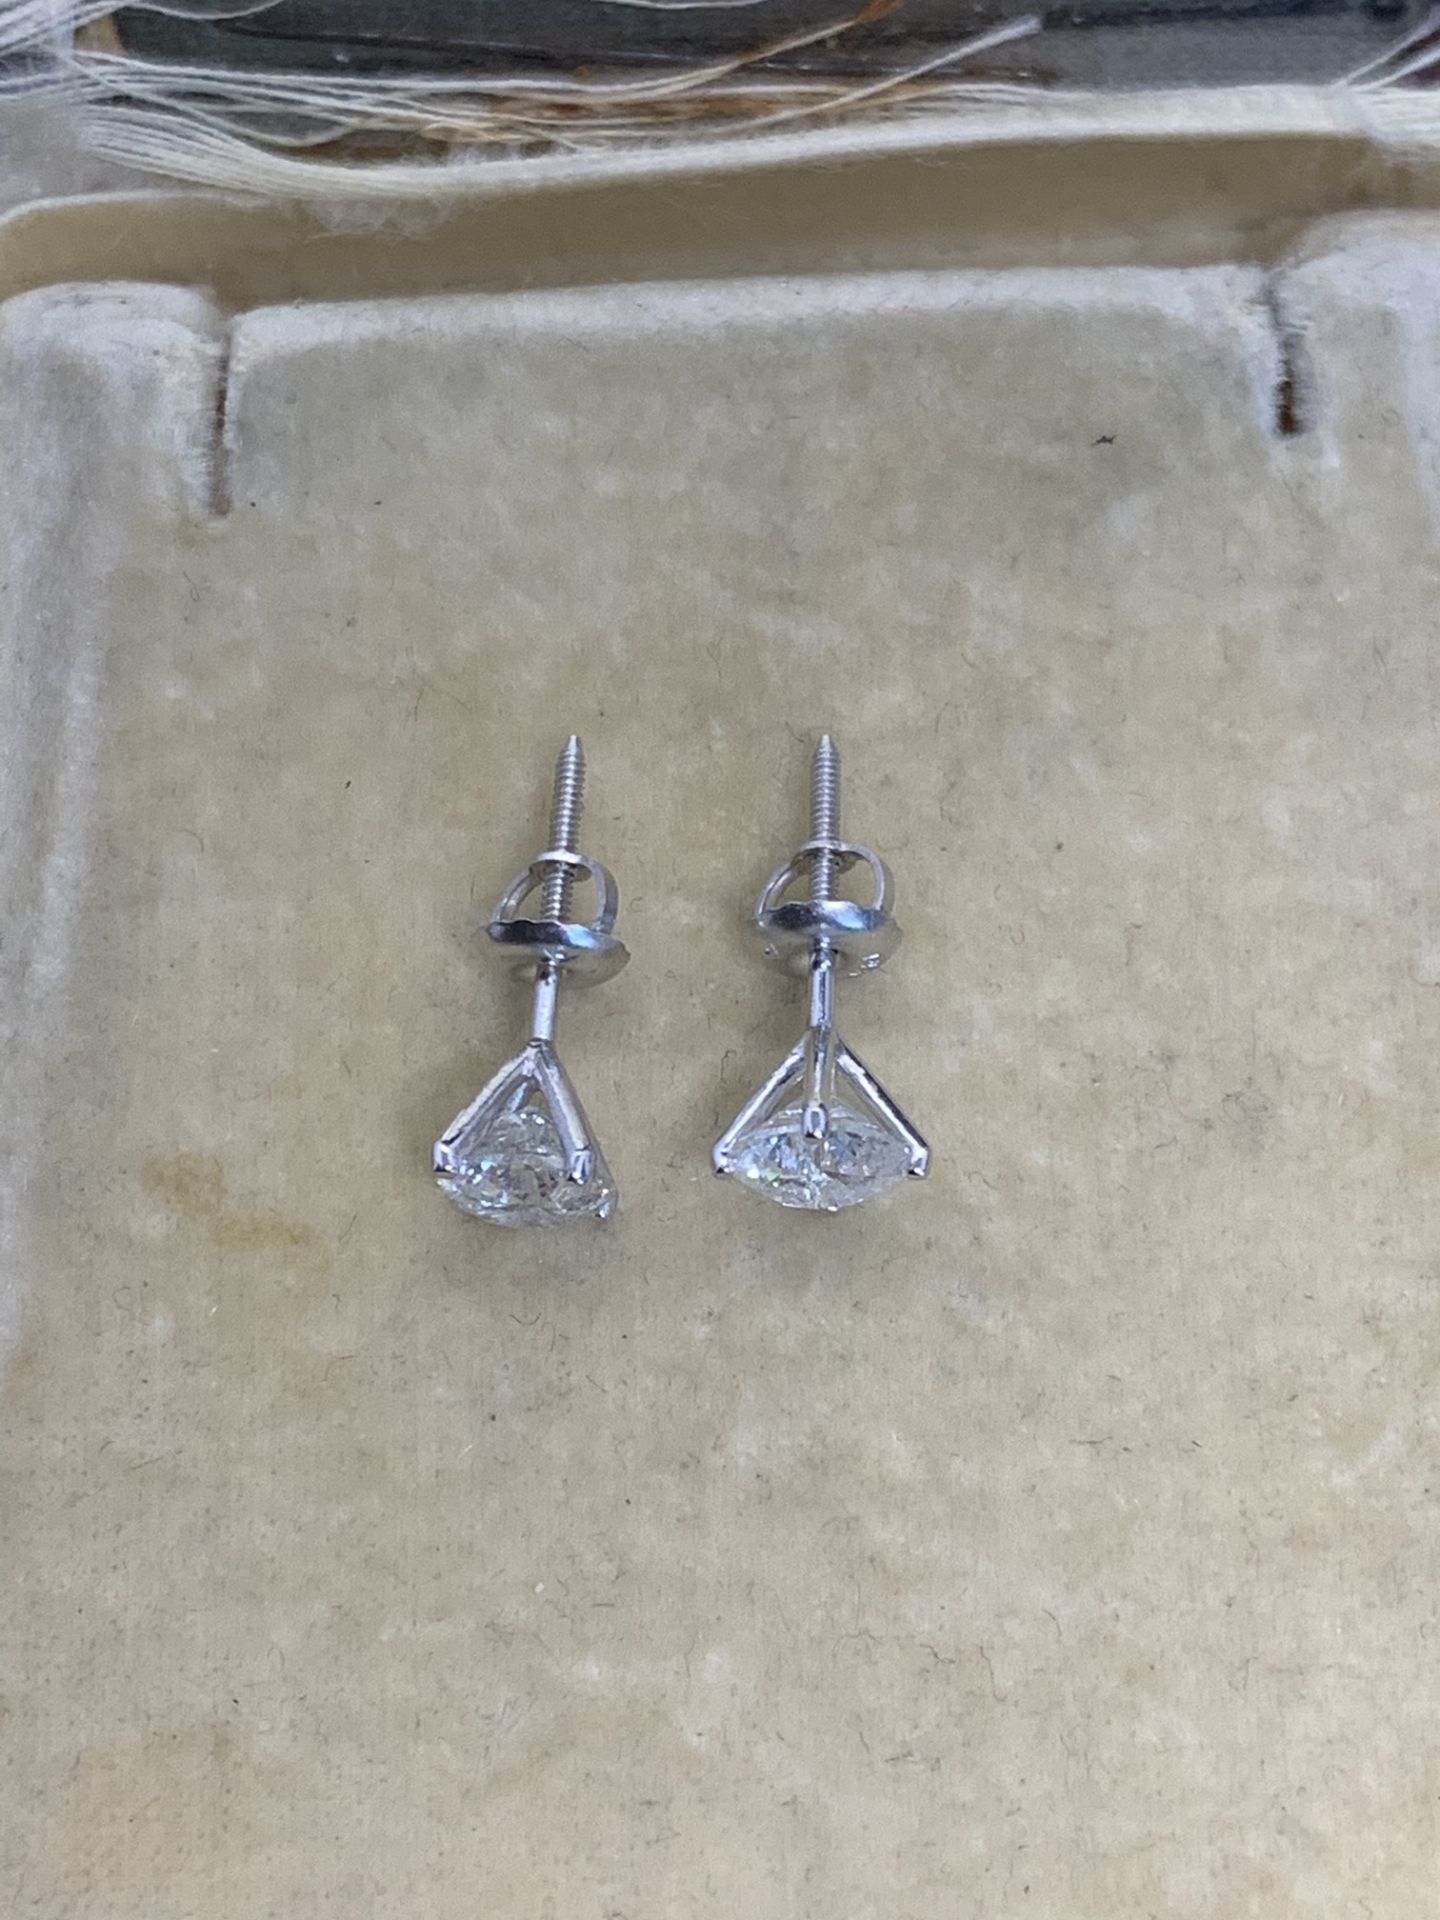 1.69ct DIAMOND SOLITAIRE EARRINGS SET IN WHITE METAL TESTED AS WHITE GOLD - SCREW BACK FOR SECURITY - Image 3 of 3